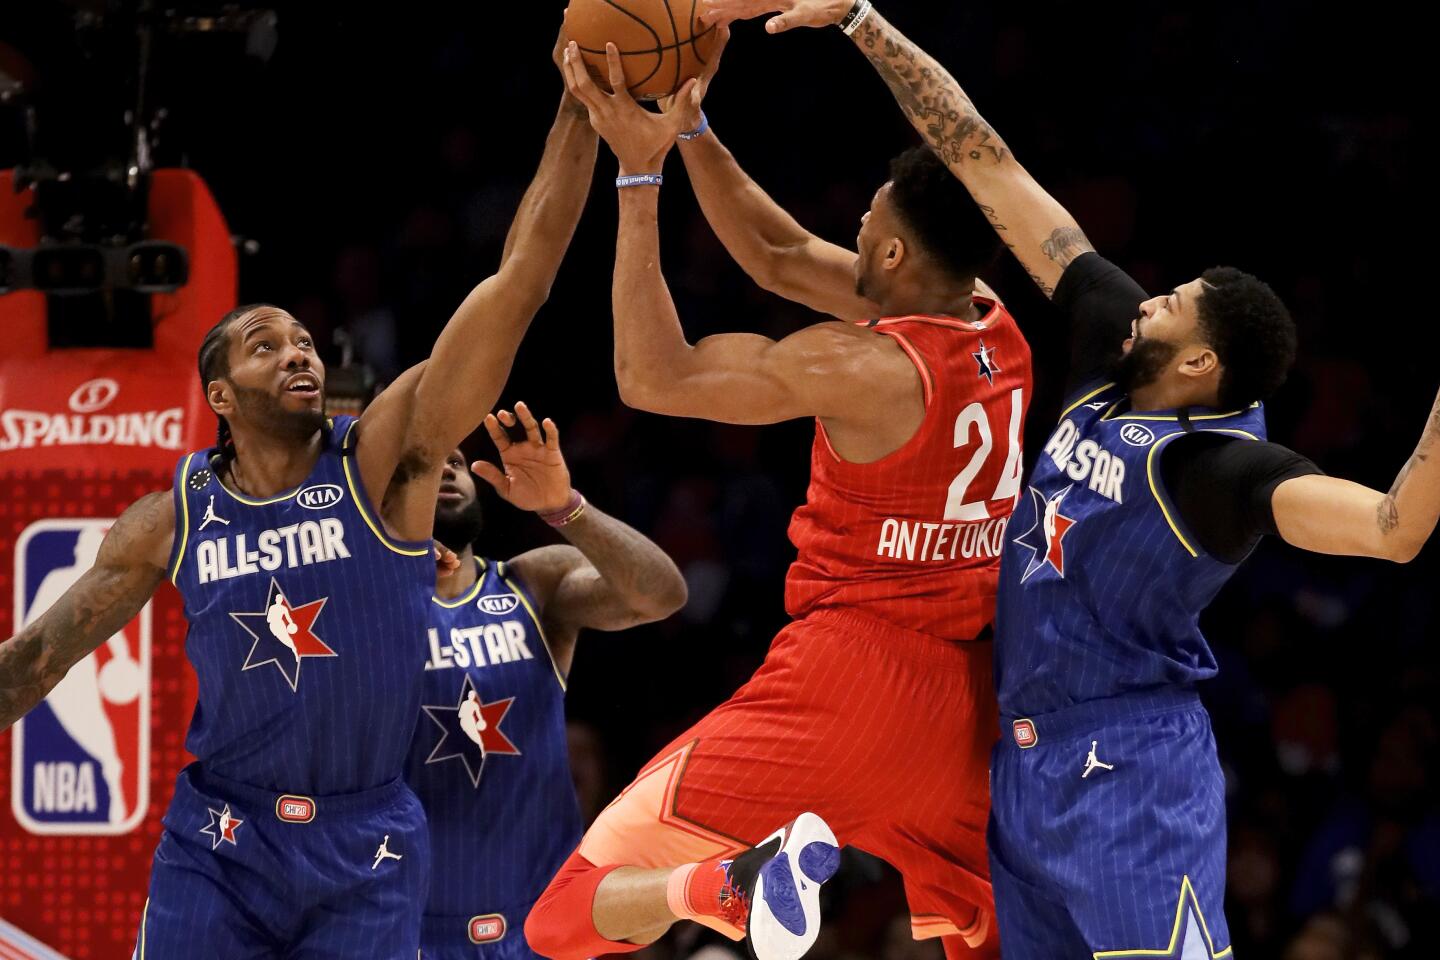 Bucks star Giannis Antetokounmpo tries to take a shot while covered by Clippers forward Kawhi Leonard, left, and Lakers forward Anthony Davis during the 69th NBA All-Star game on Feb. 16, 2020, at United Center in Chicago.